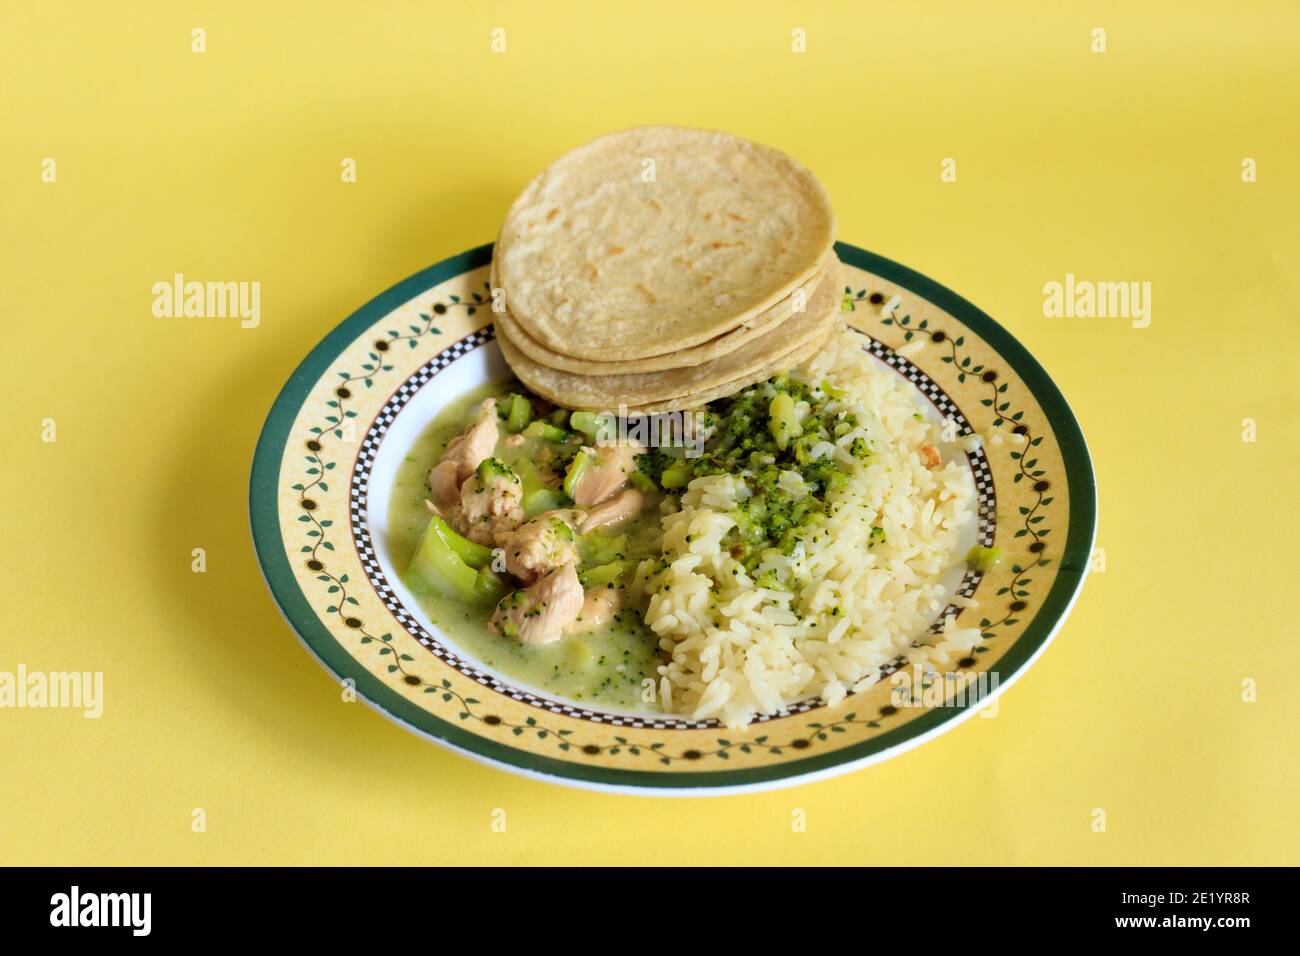 Homemade healthy food dish with chicken, rice and broccoli Stock Photo